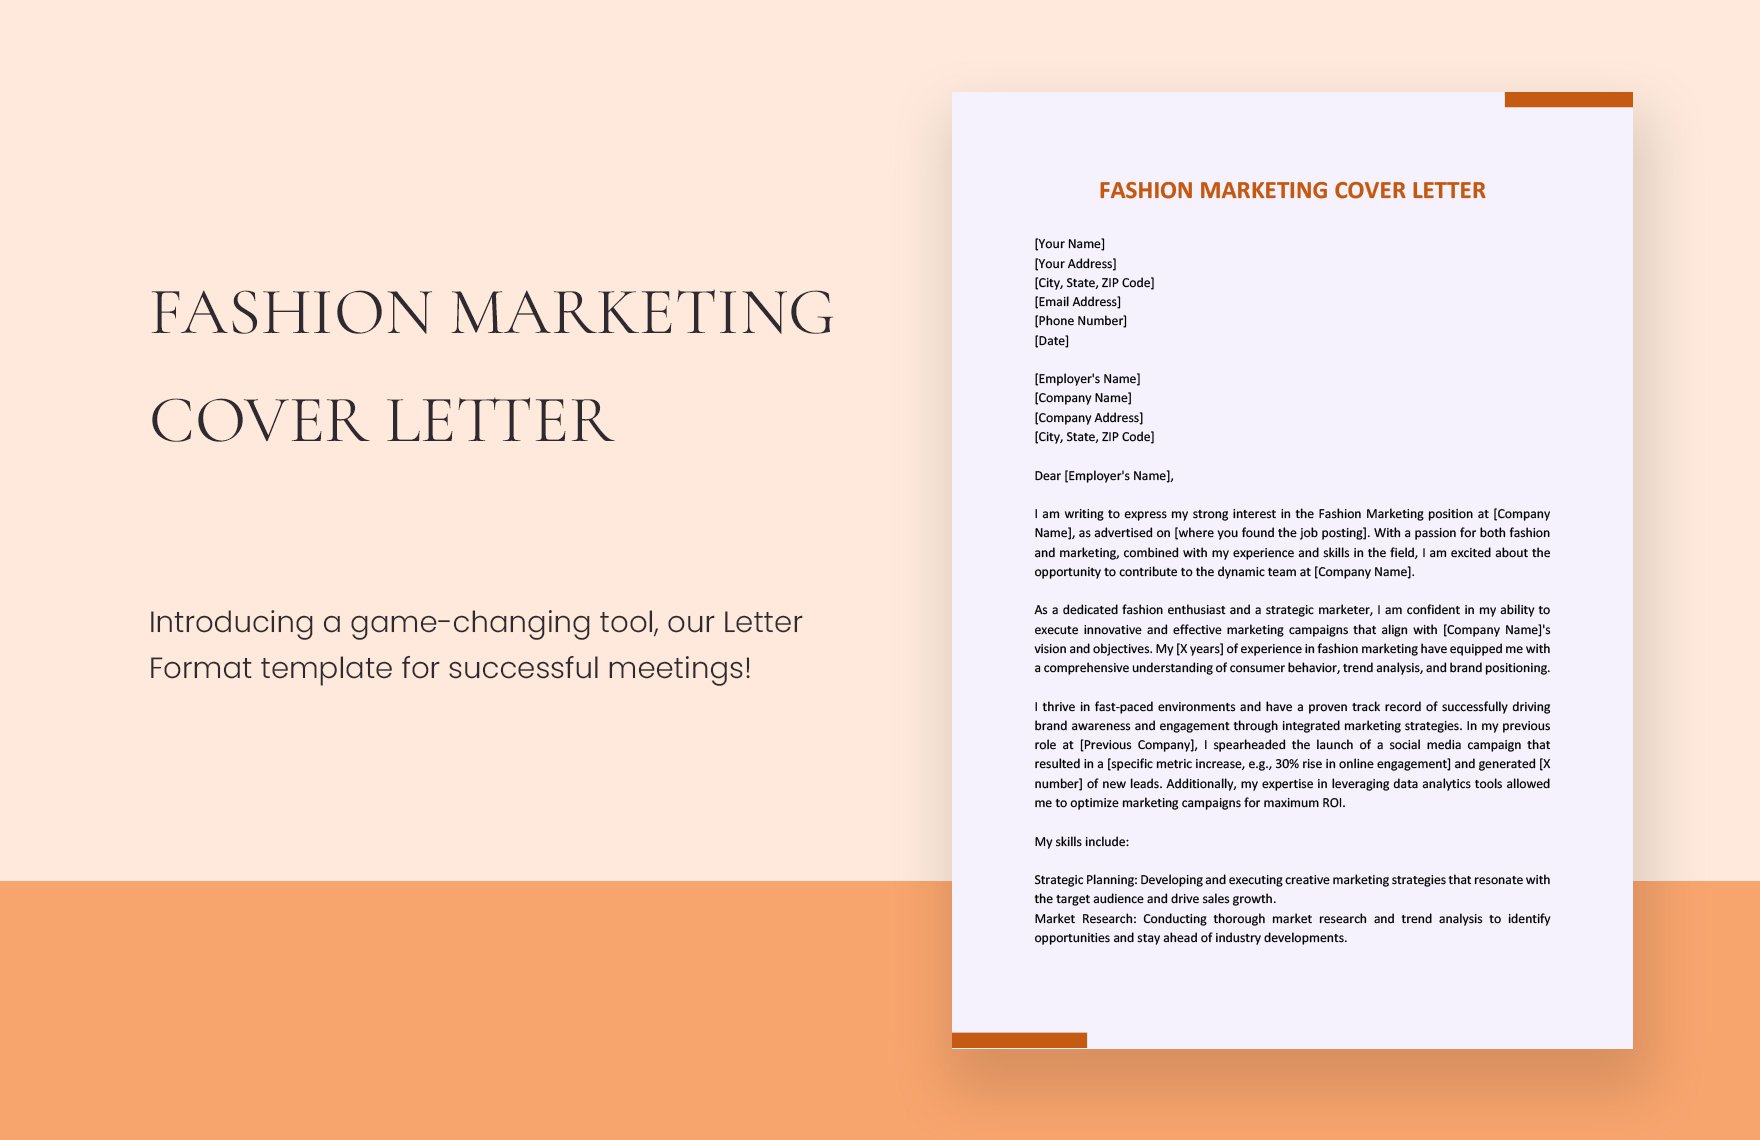 Fashion Marketing Cover Letter